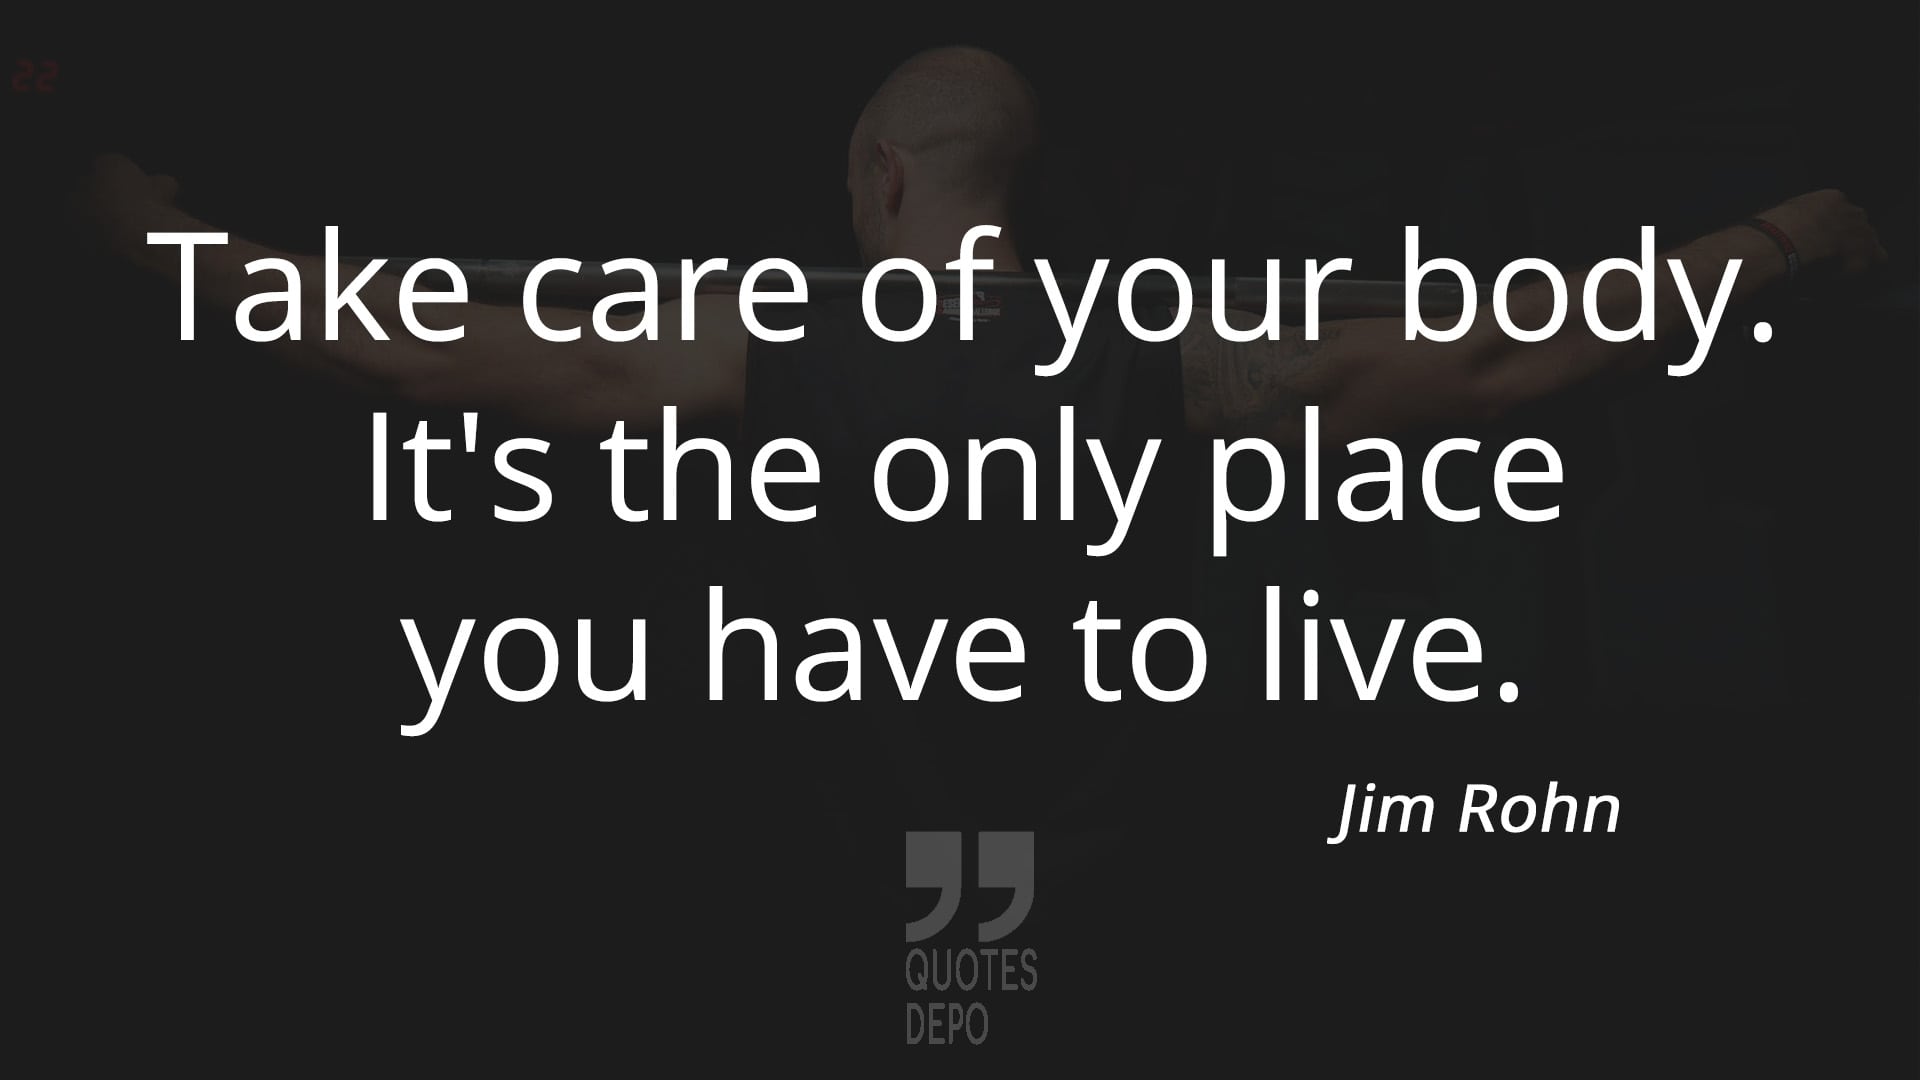 take care of your body - jim rohn quotes